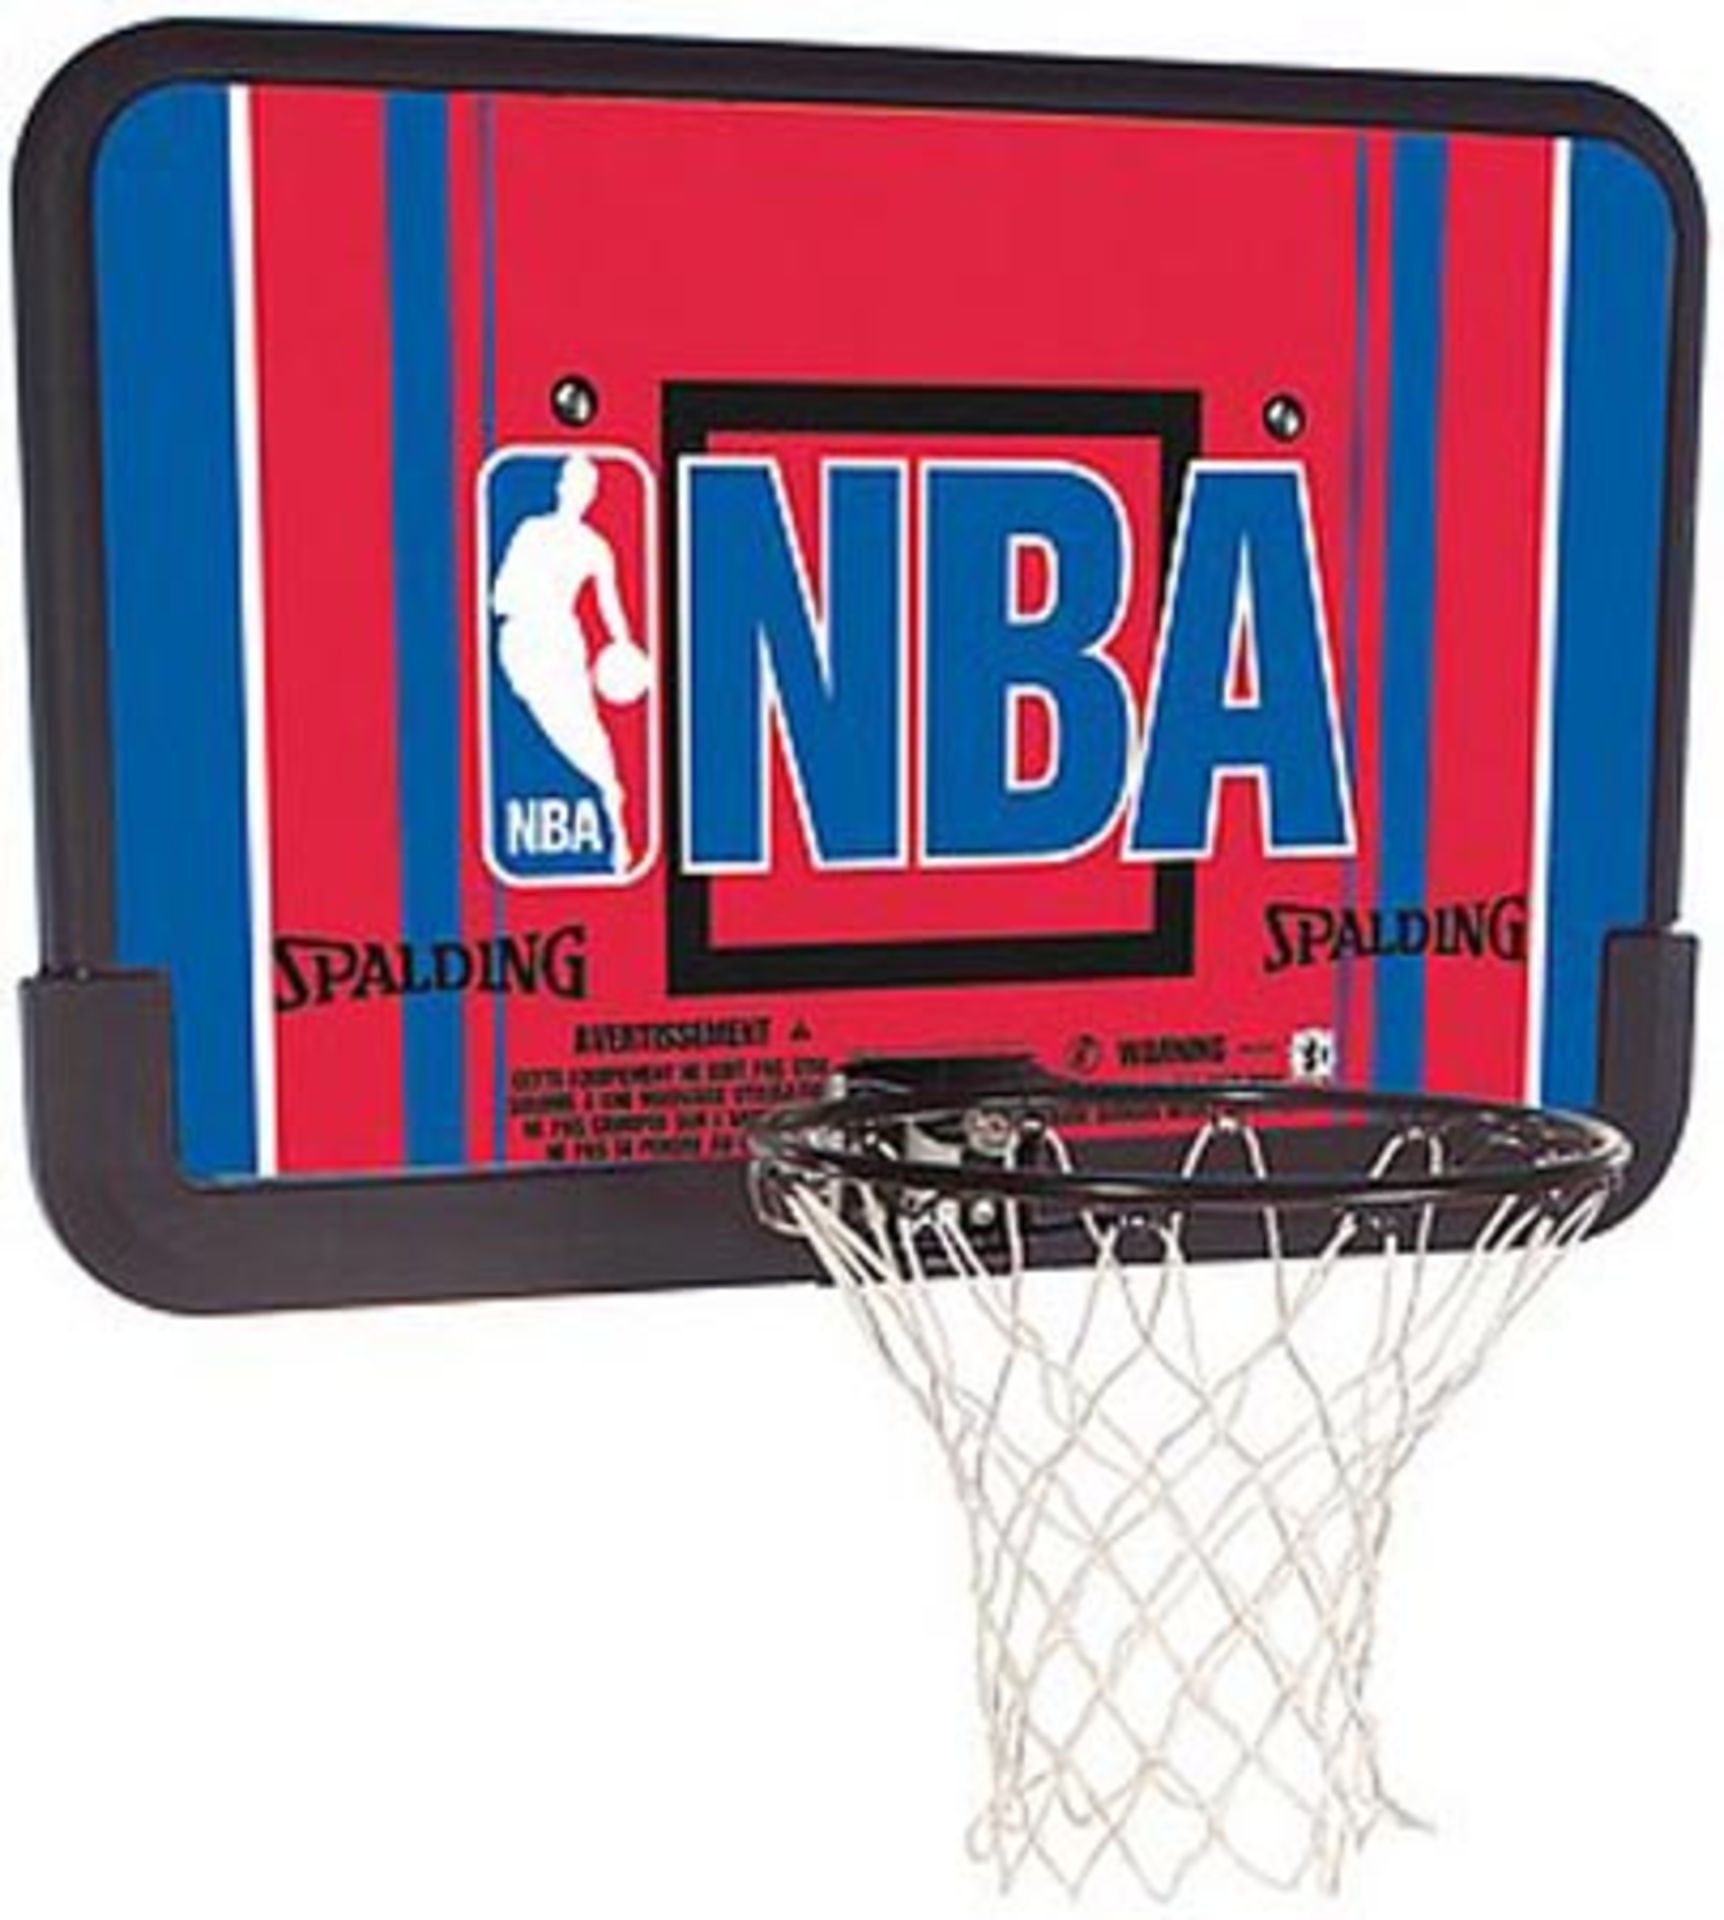 V Brand New Spalding 44" Eco-Composite NBA BasketBall Hoop with Back Board *ITEM IS BLUE AND - Image 2 of 2